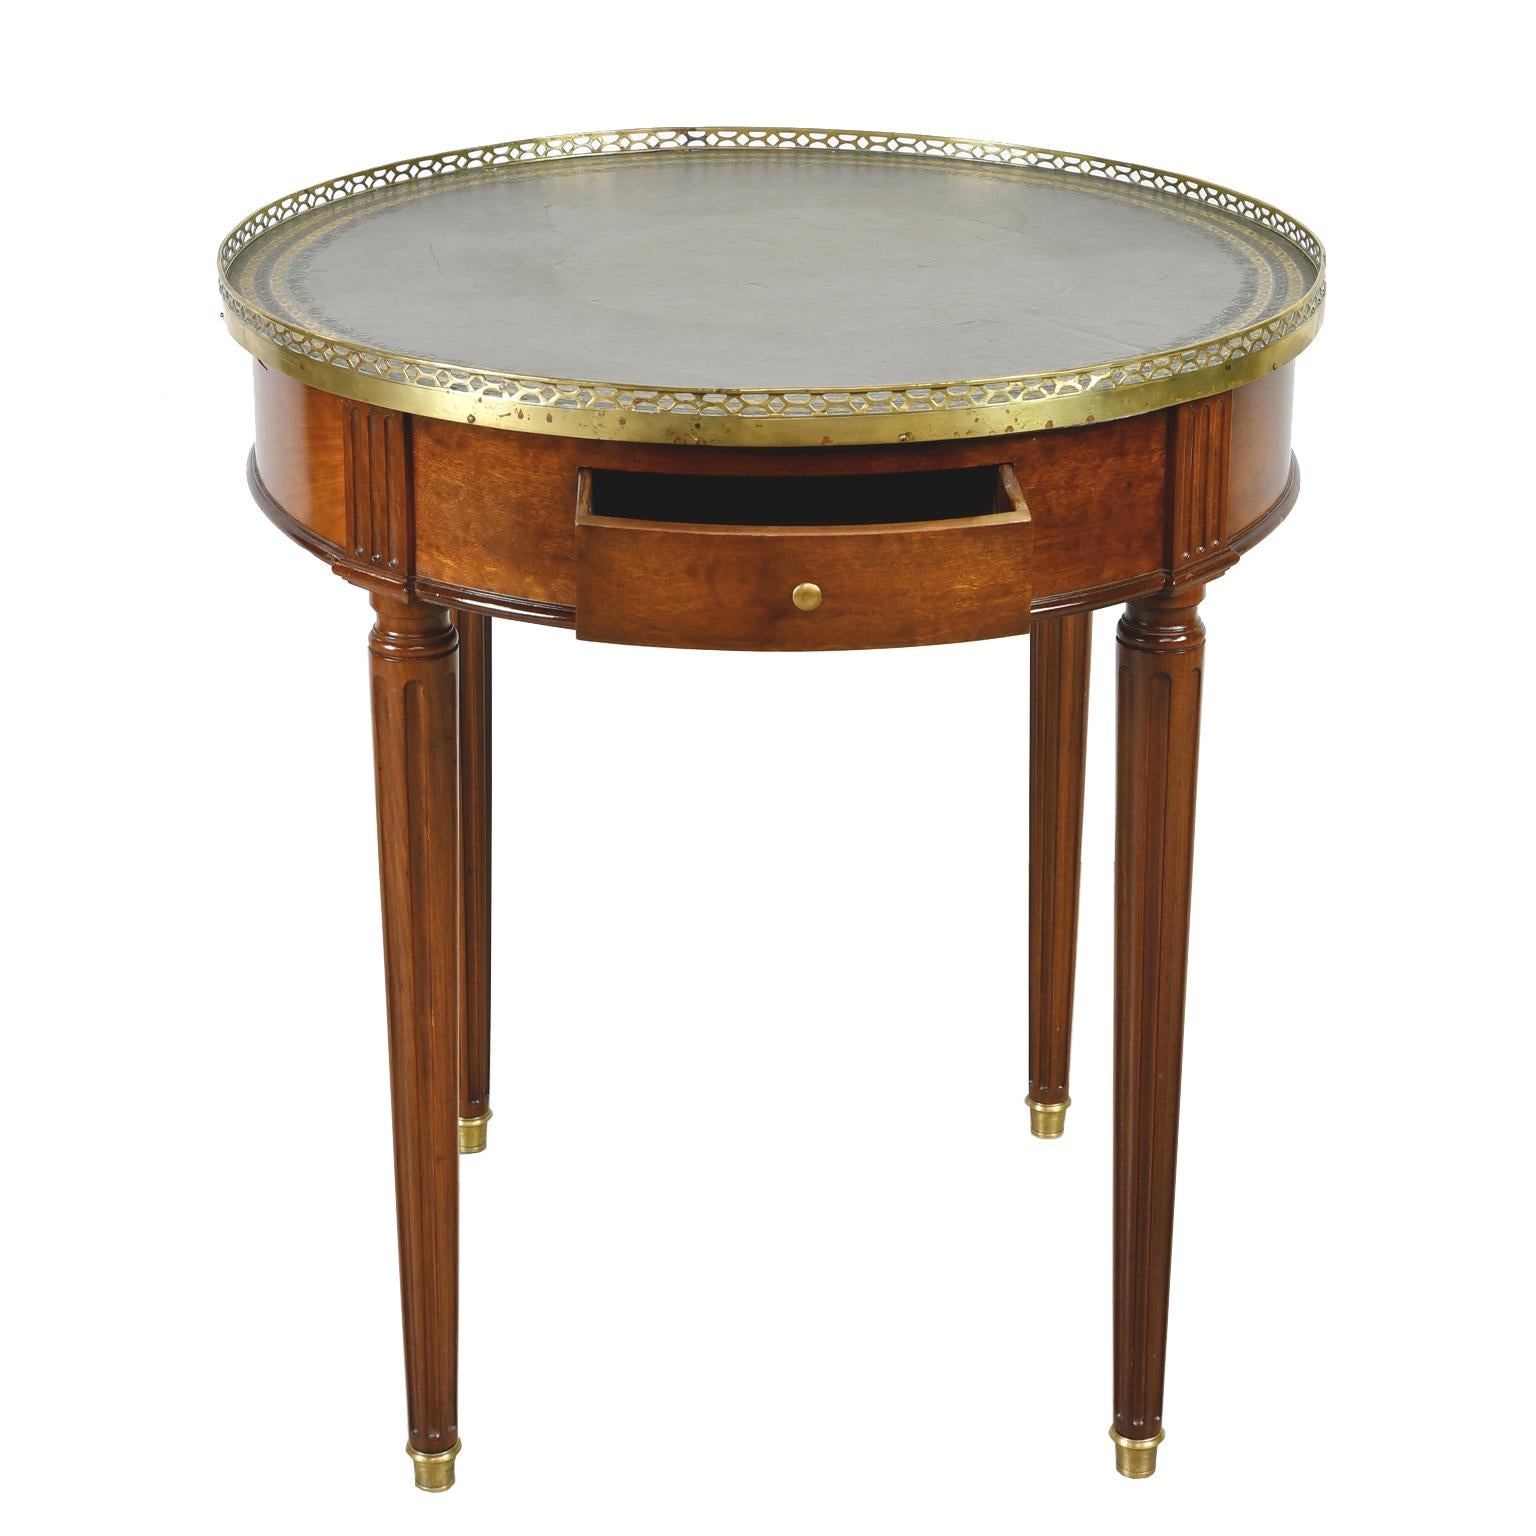 19th Century Round Bouillotte Table in Mahogany with Green Tooled Leather Top, France